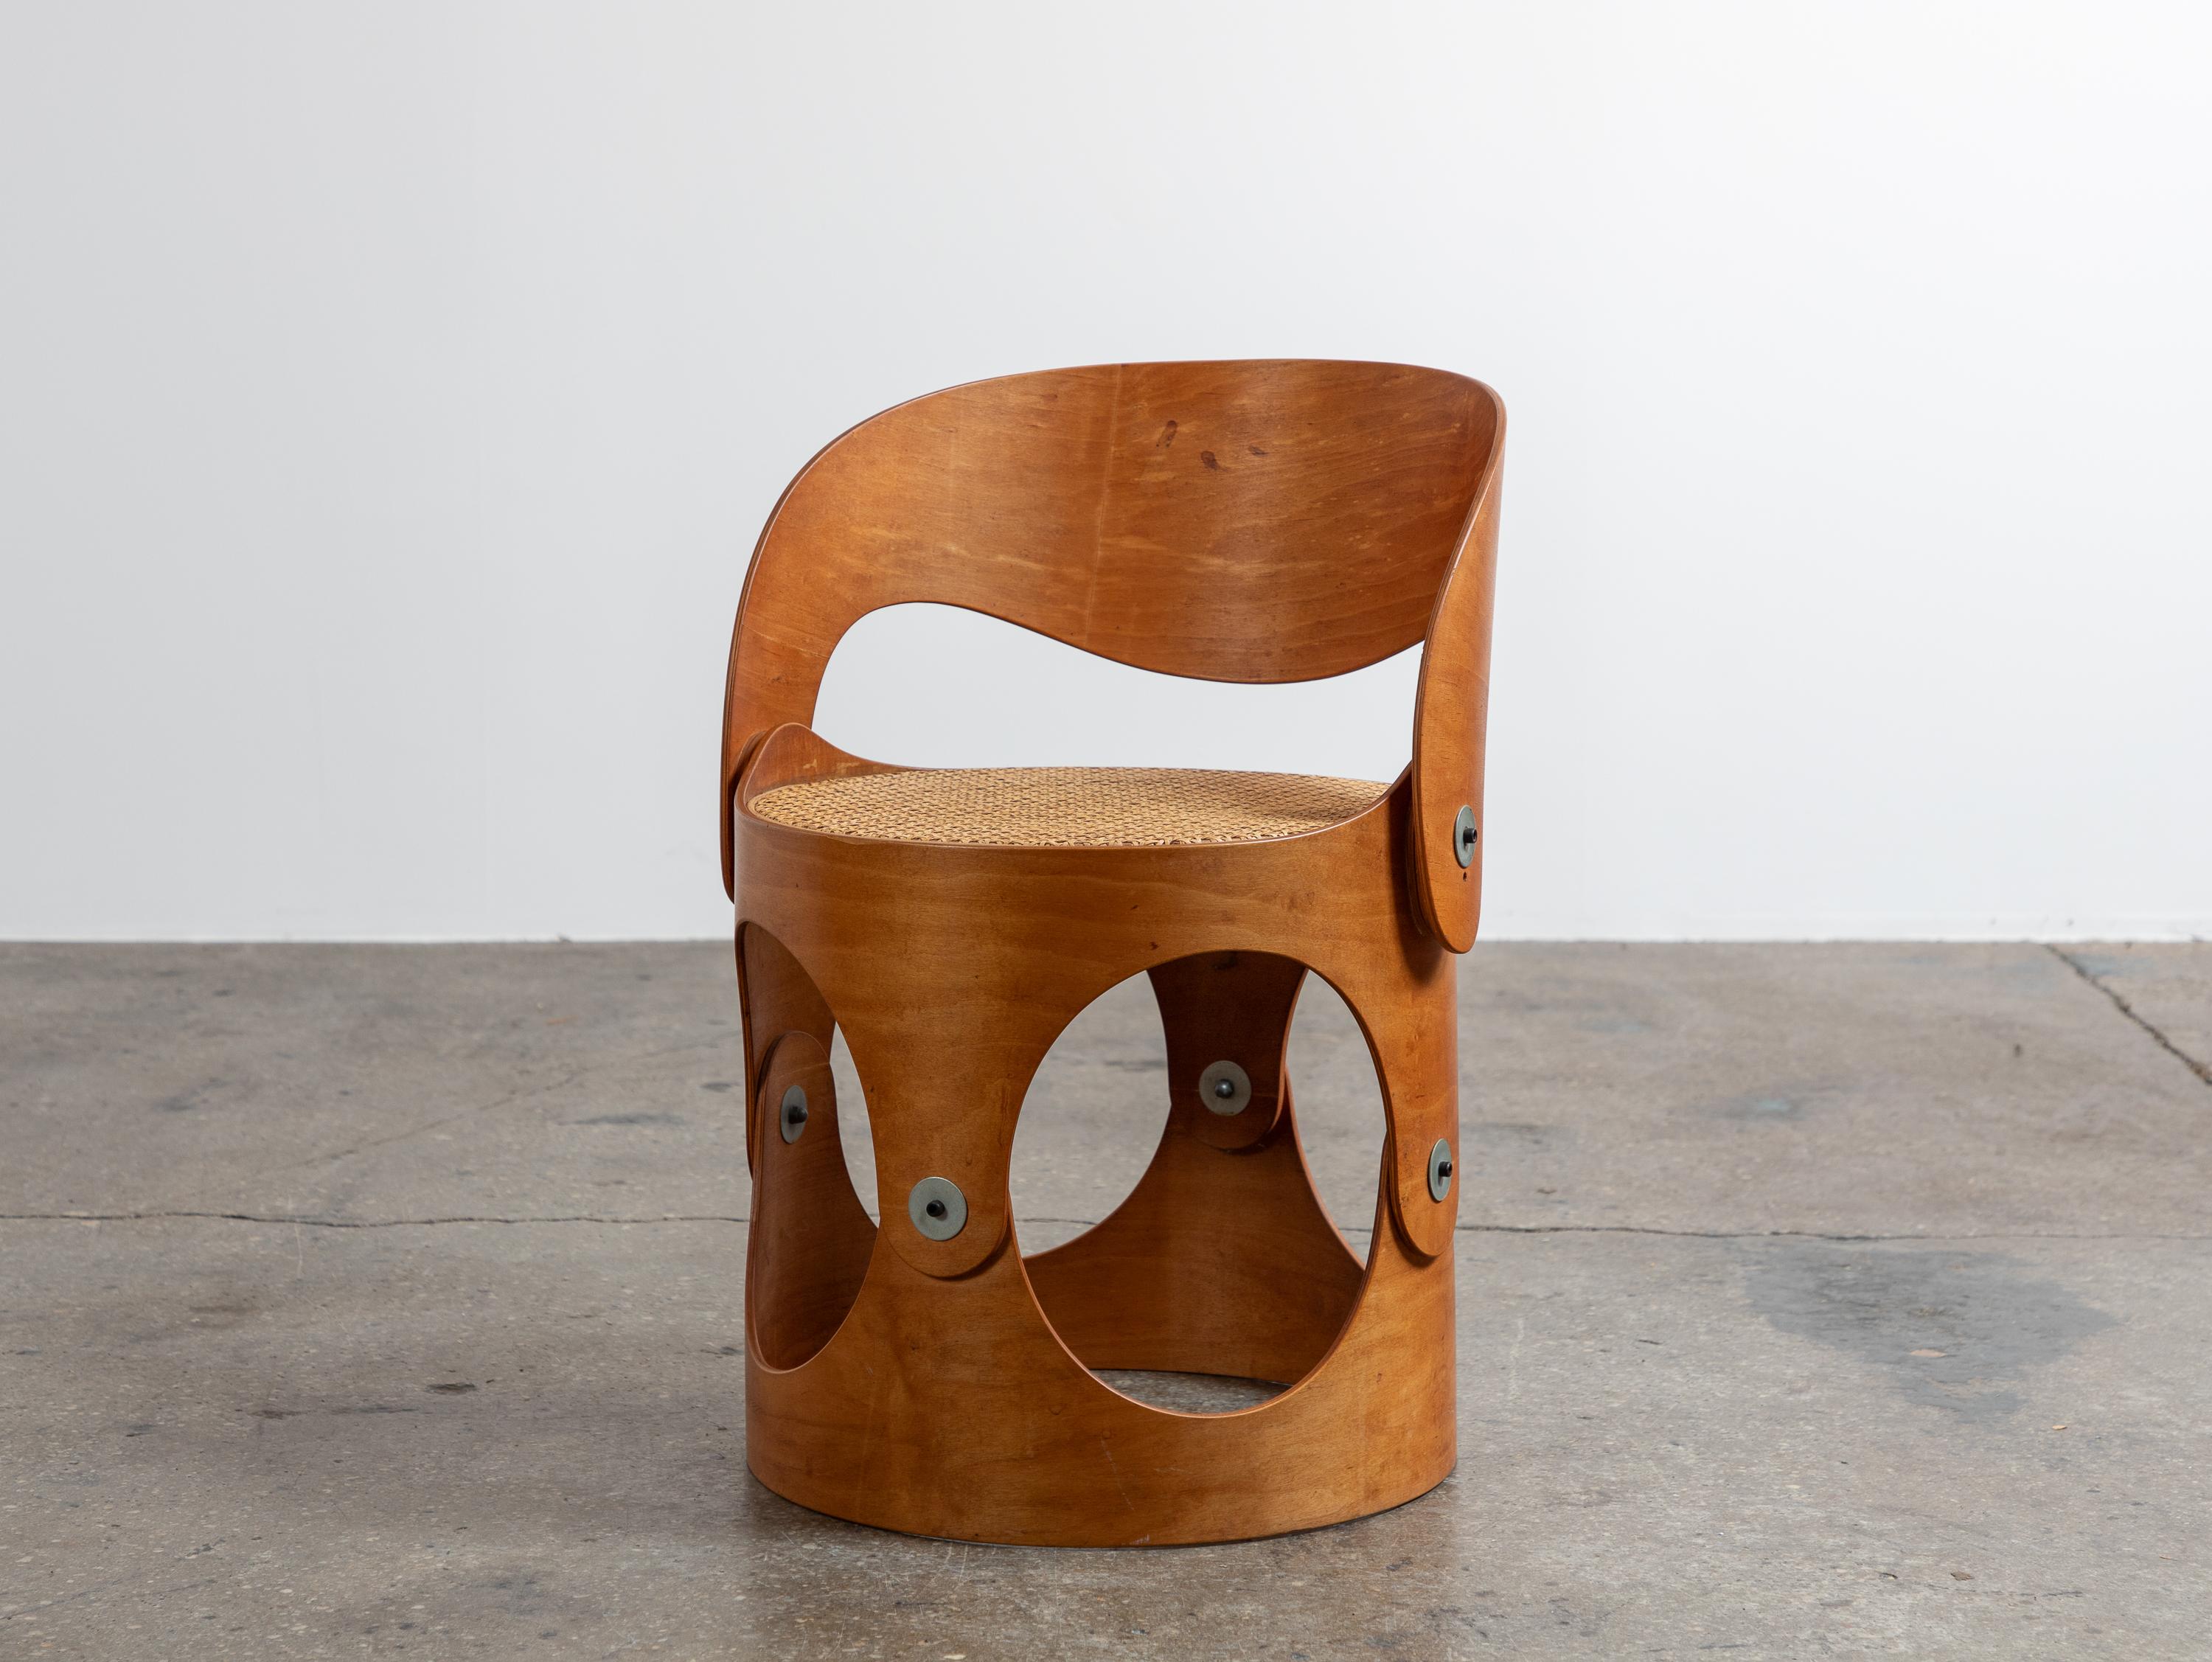 American Unique Modernist Bent Plywood Cane Chair by Leandre Poisson For Sale